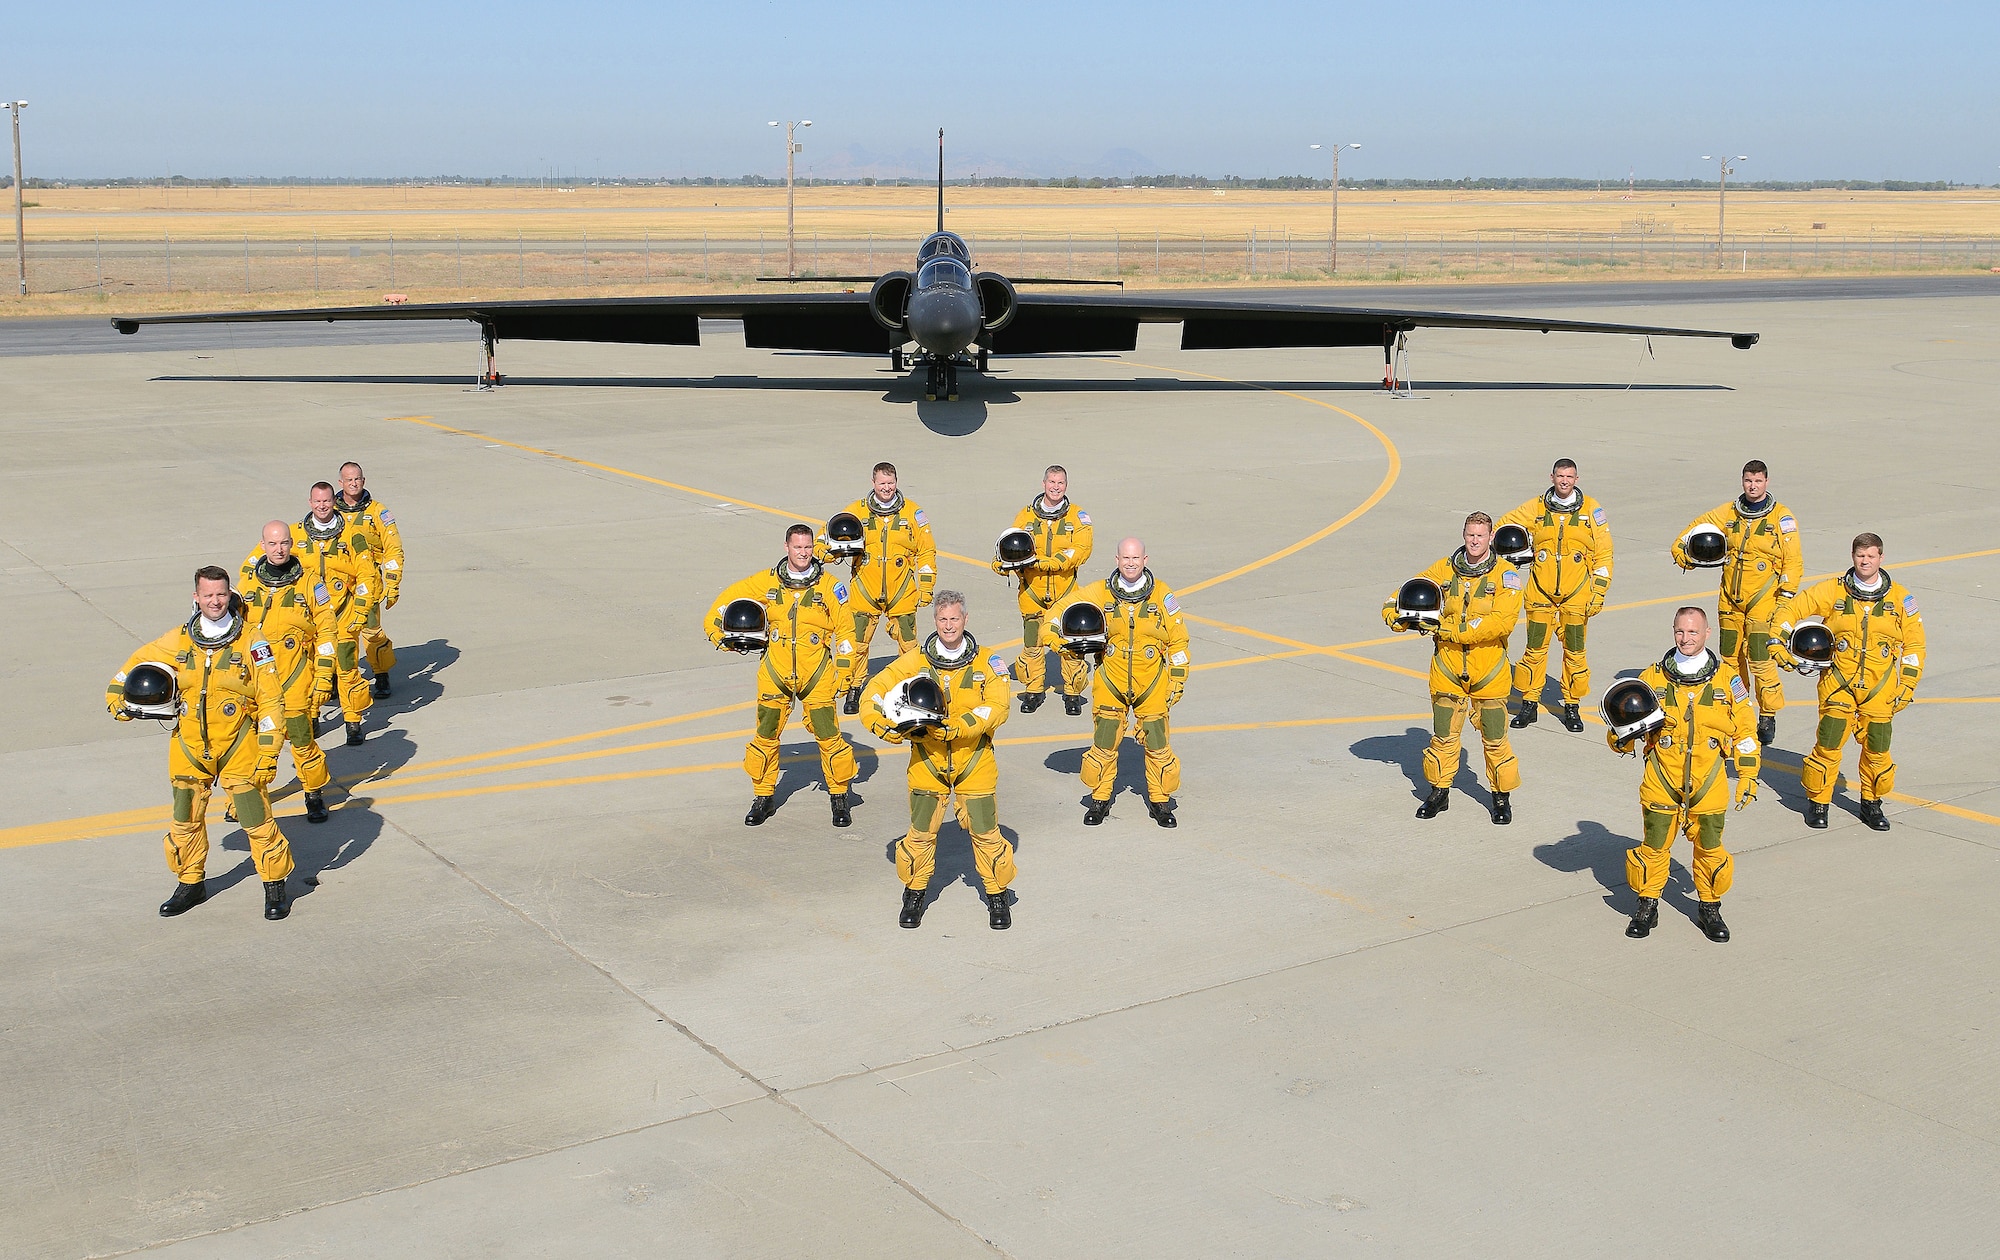 U-2S Dragon Lady Intelligence, Surveillance and Reconnaissance Aircraft instructor pilots from the 1st Reconnaissance Squadron pose for a photo in front of a two seat U-2S August 17, 2012 at Beale Air Force Base, Calif. Less people have piloted the U-2 than have earned Super Bowl rings. (U.S. Air Force photo by Mr. John Schwab)